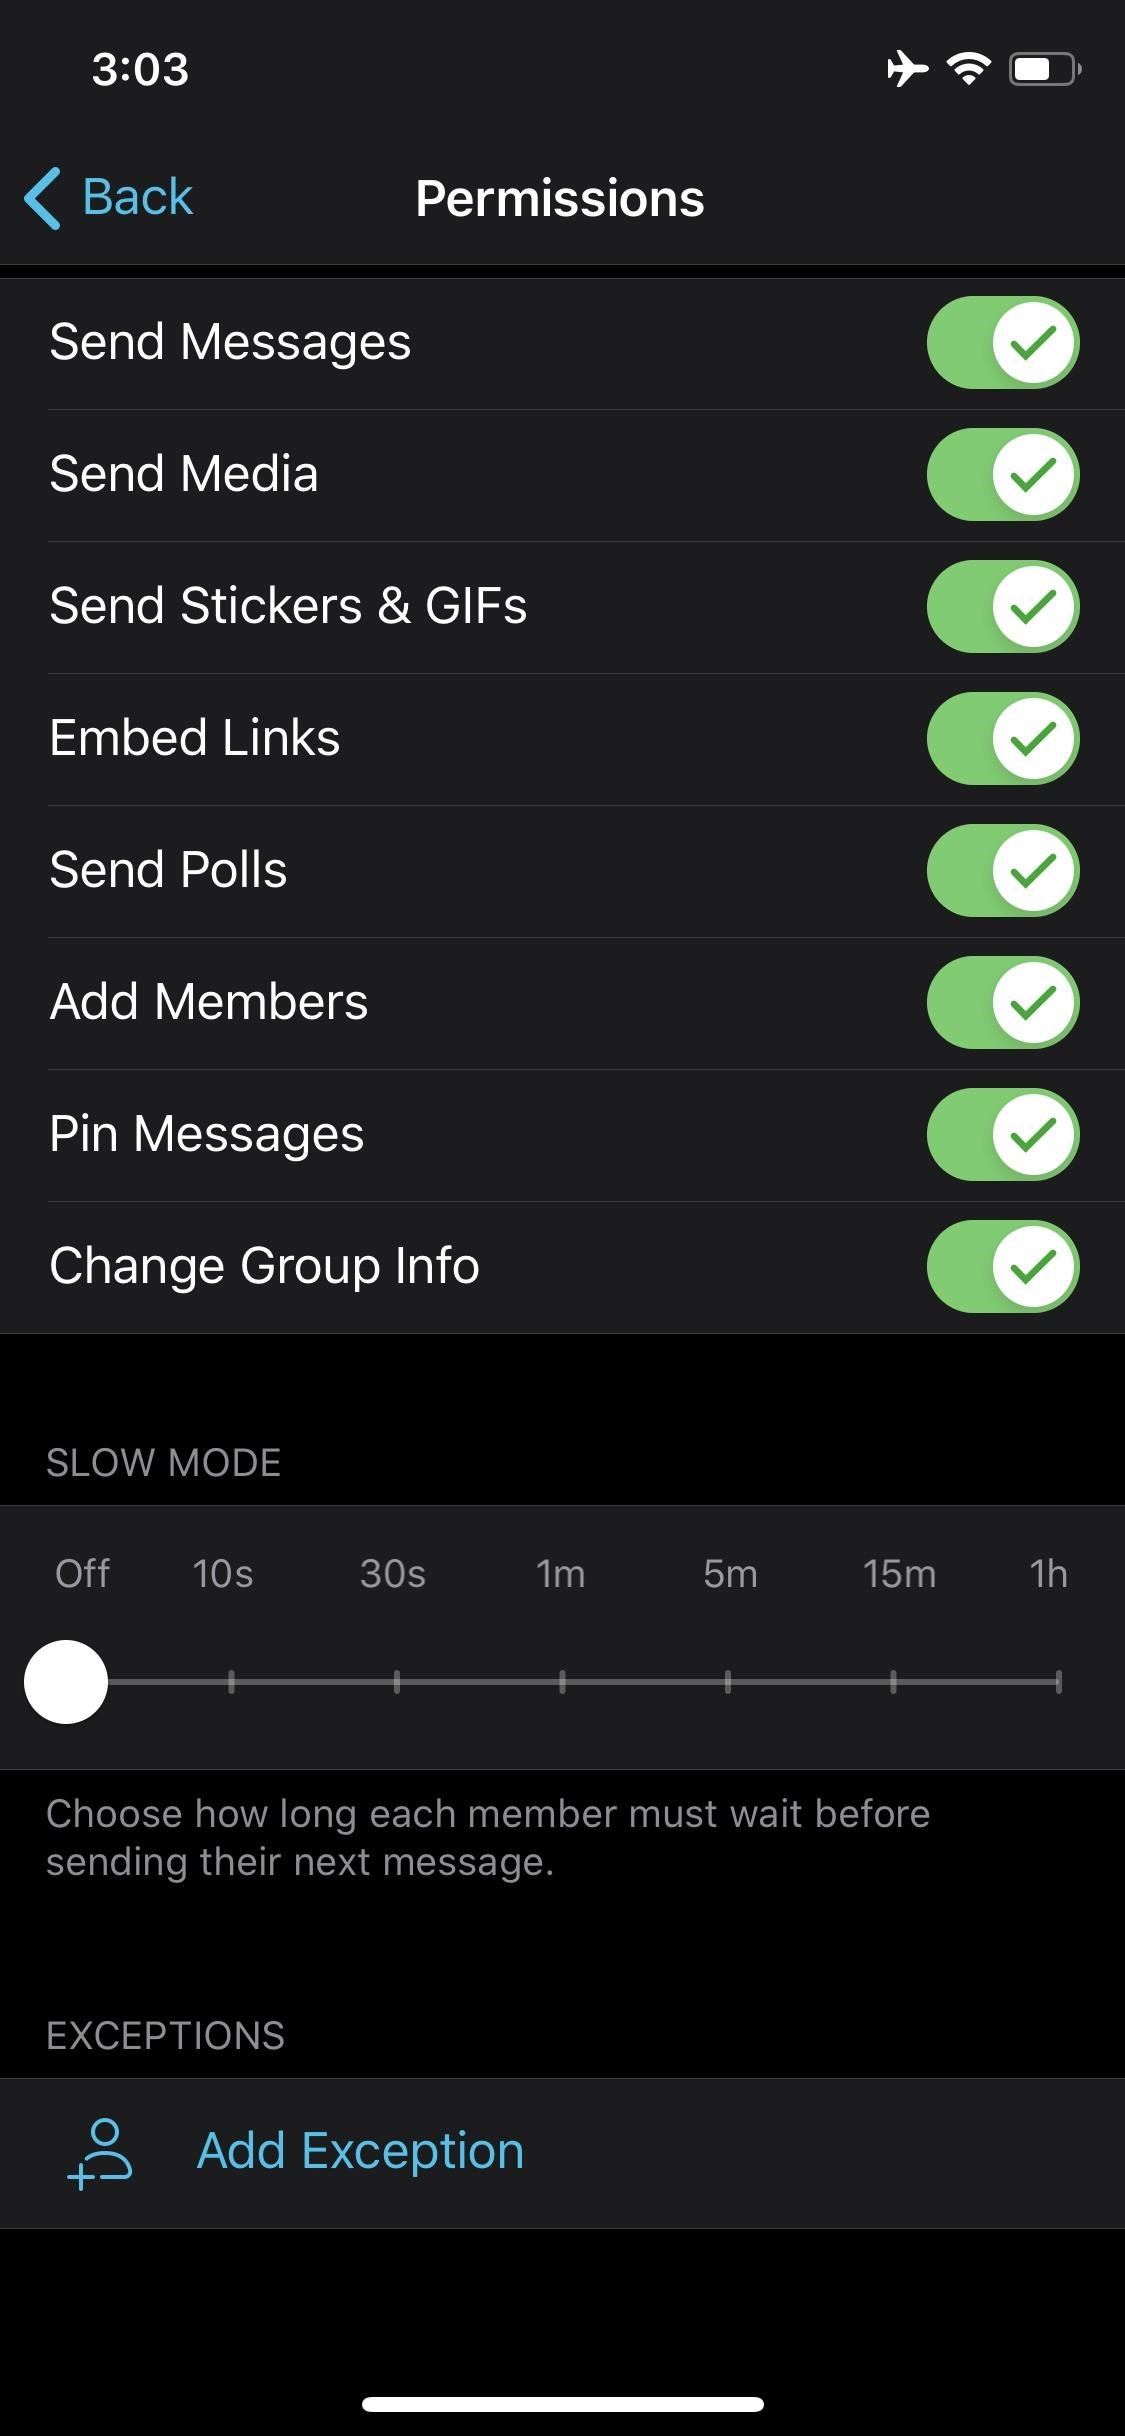 How to Slow Down Telegram Group Chats to Catch Up & Follow Along